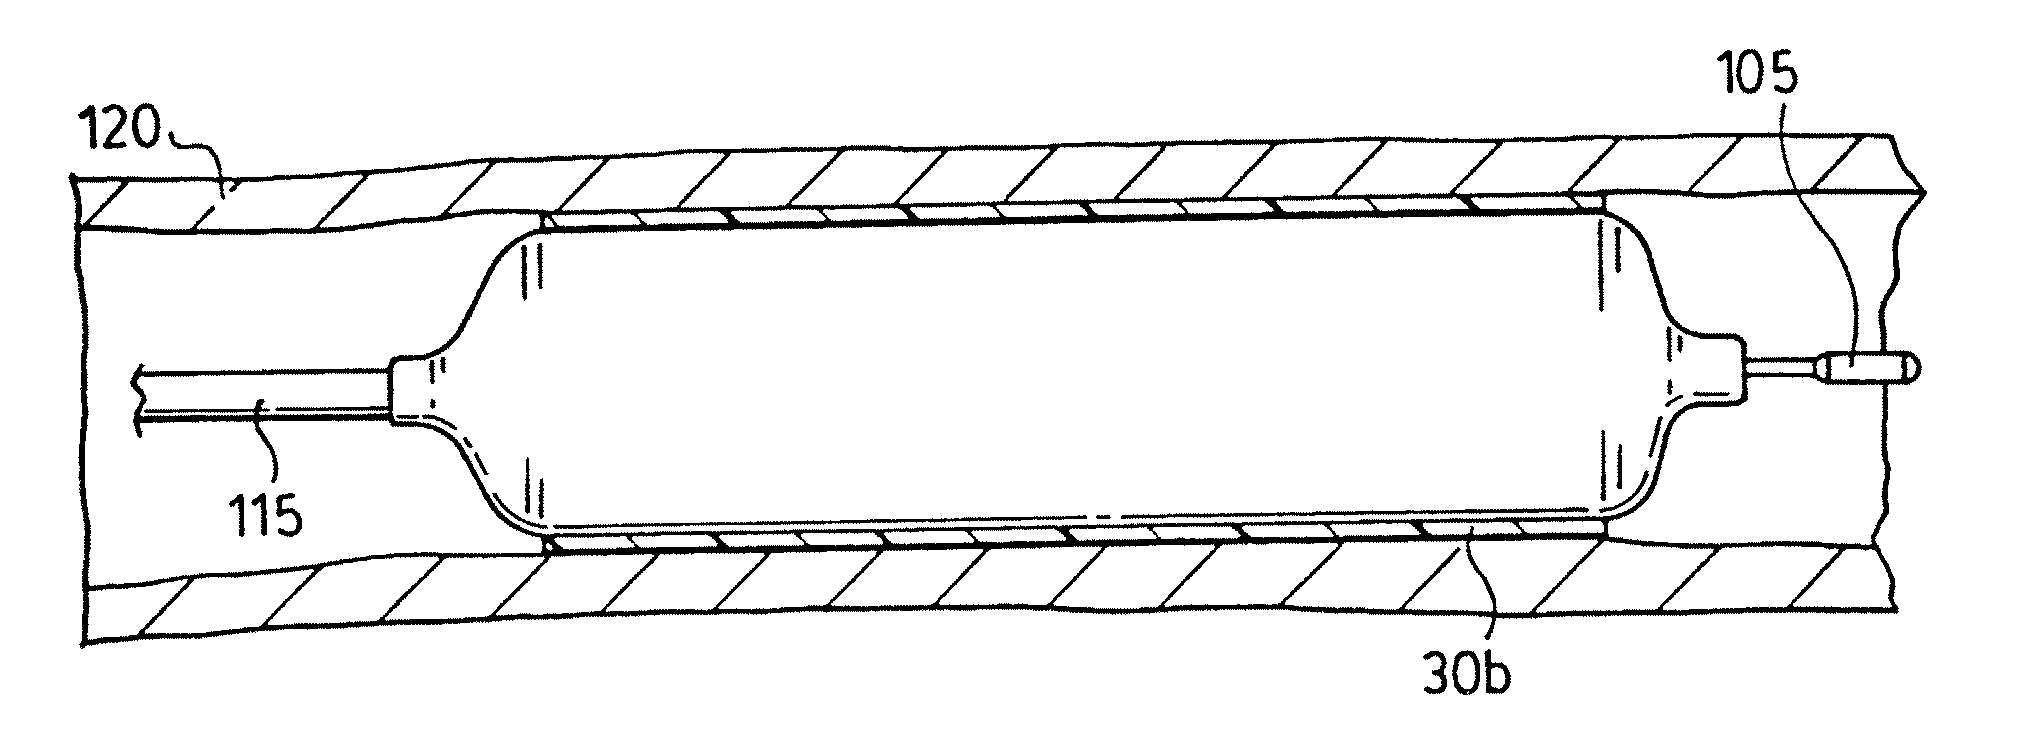 Small vessel expandable stent and method for production of same